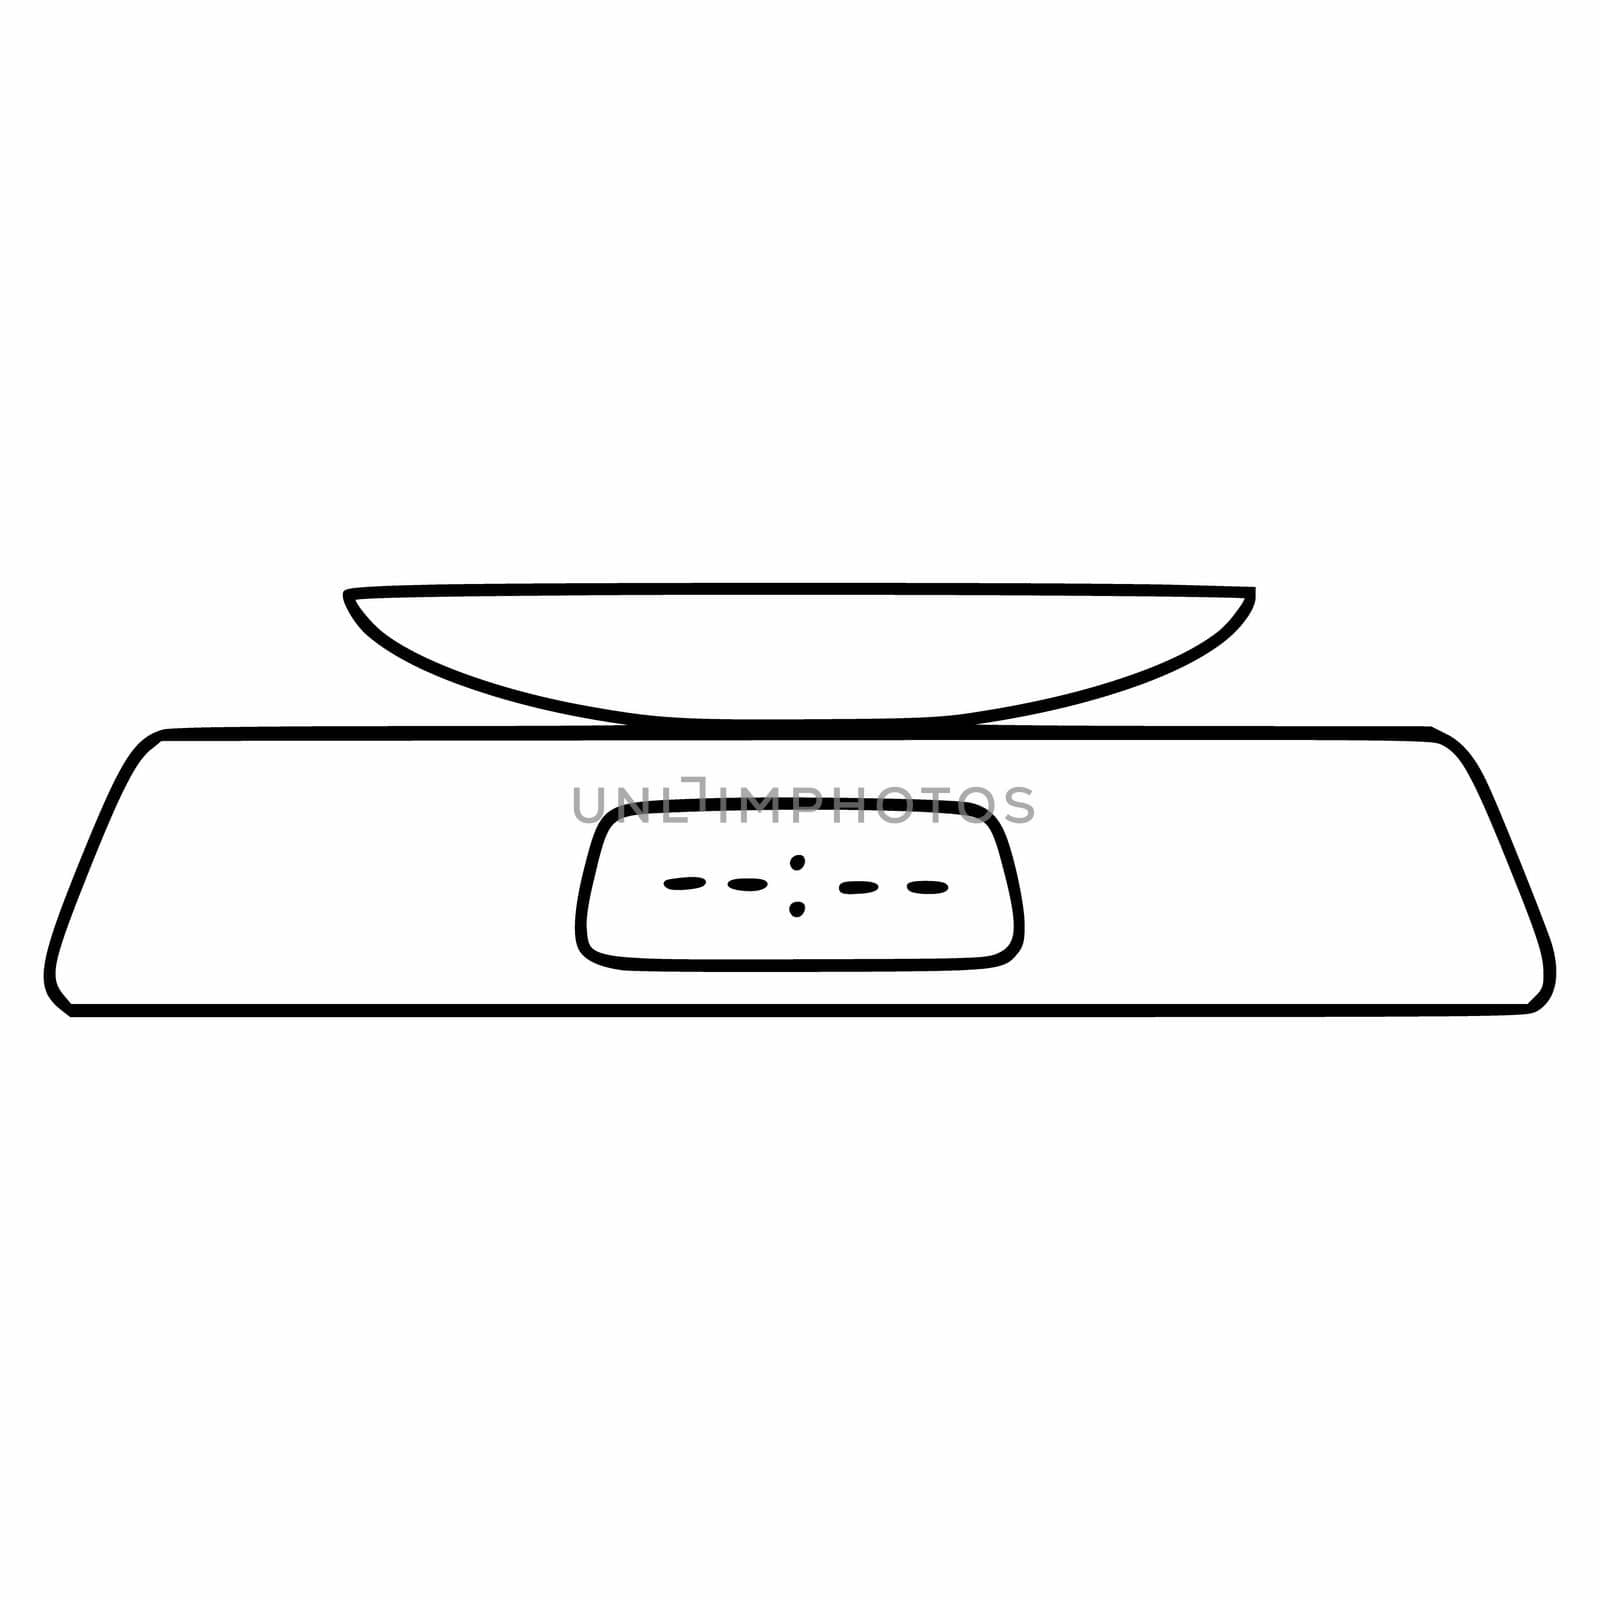 Kitchen electronic scales in the style of dood. Kitchen appliance for measuring the weight of food. Vector icon on a white background. by polinka_art